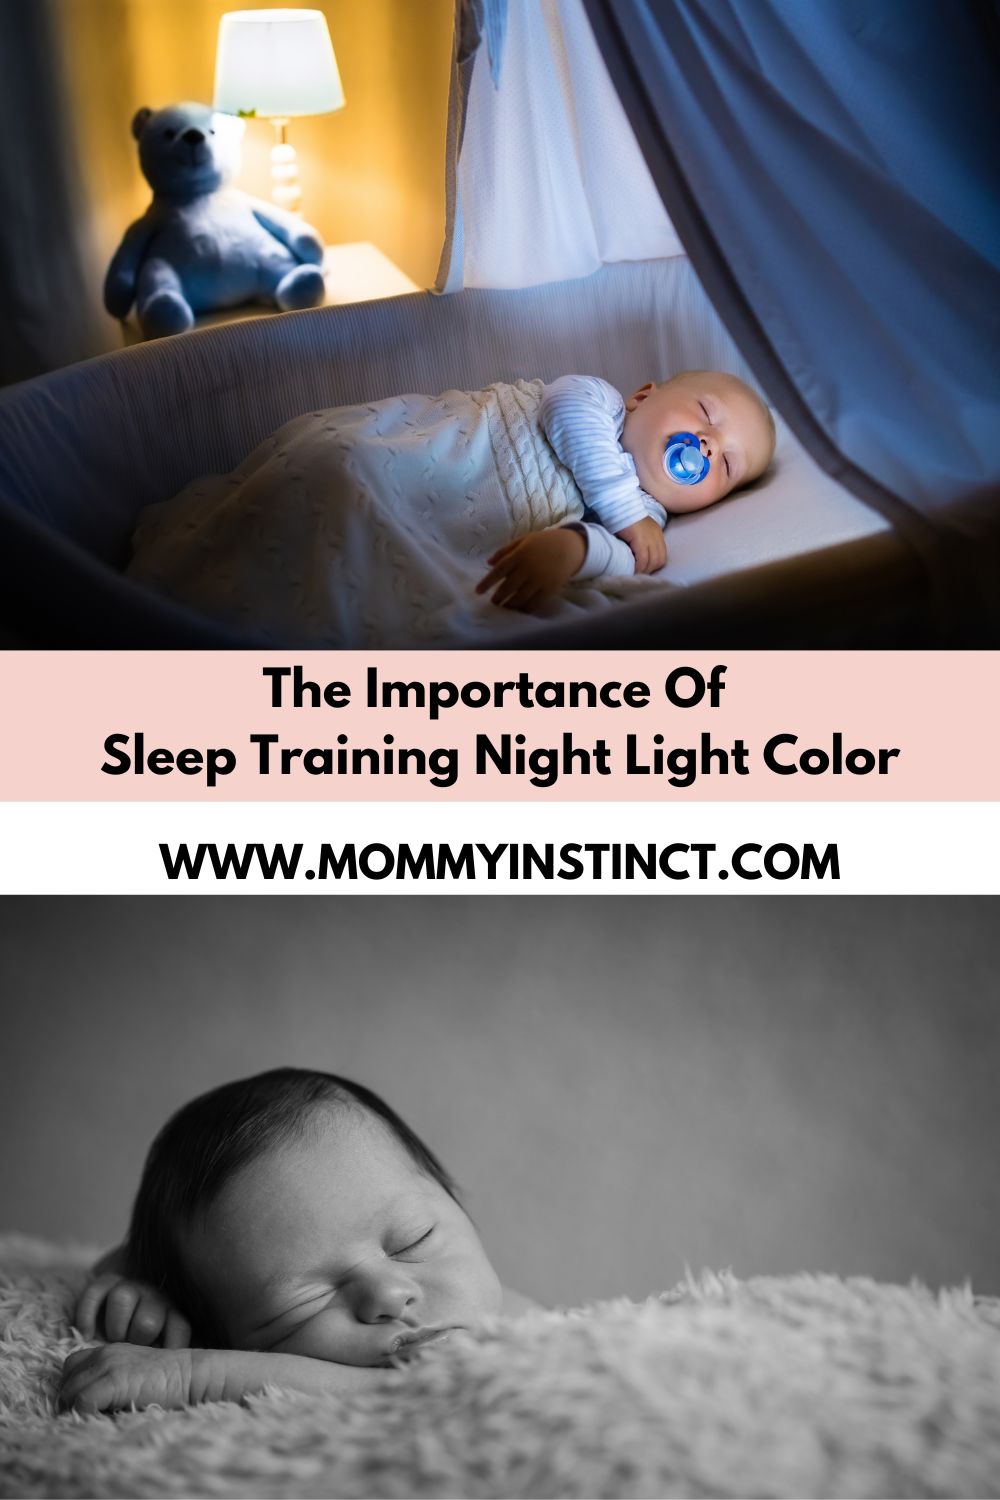 Sleep Training Night Light Color: More Important Than You Think